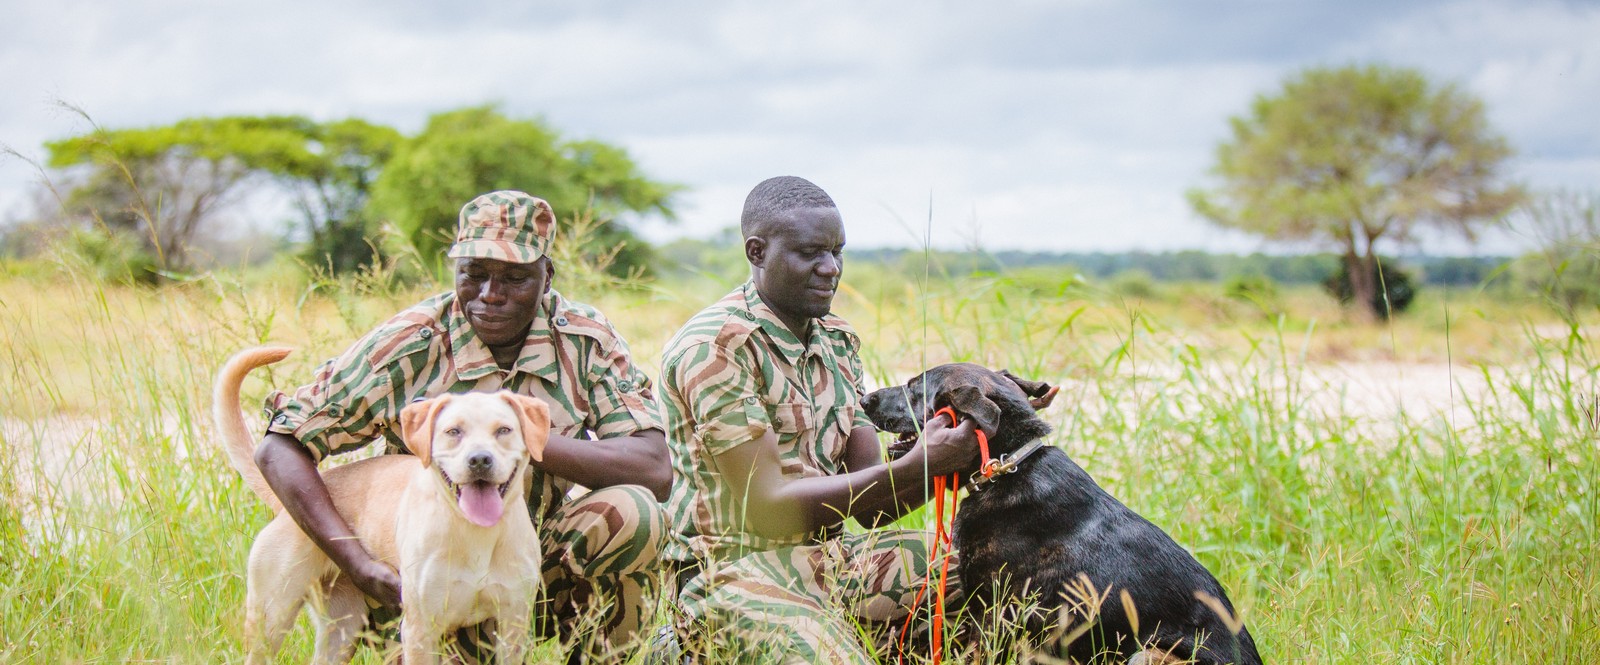 Image of rangers and their tracking and detection dogs who are an invaluable addition to field programmes’ anti-poaching patrols and technologies.